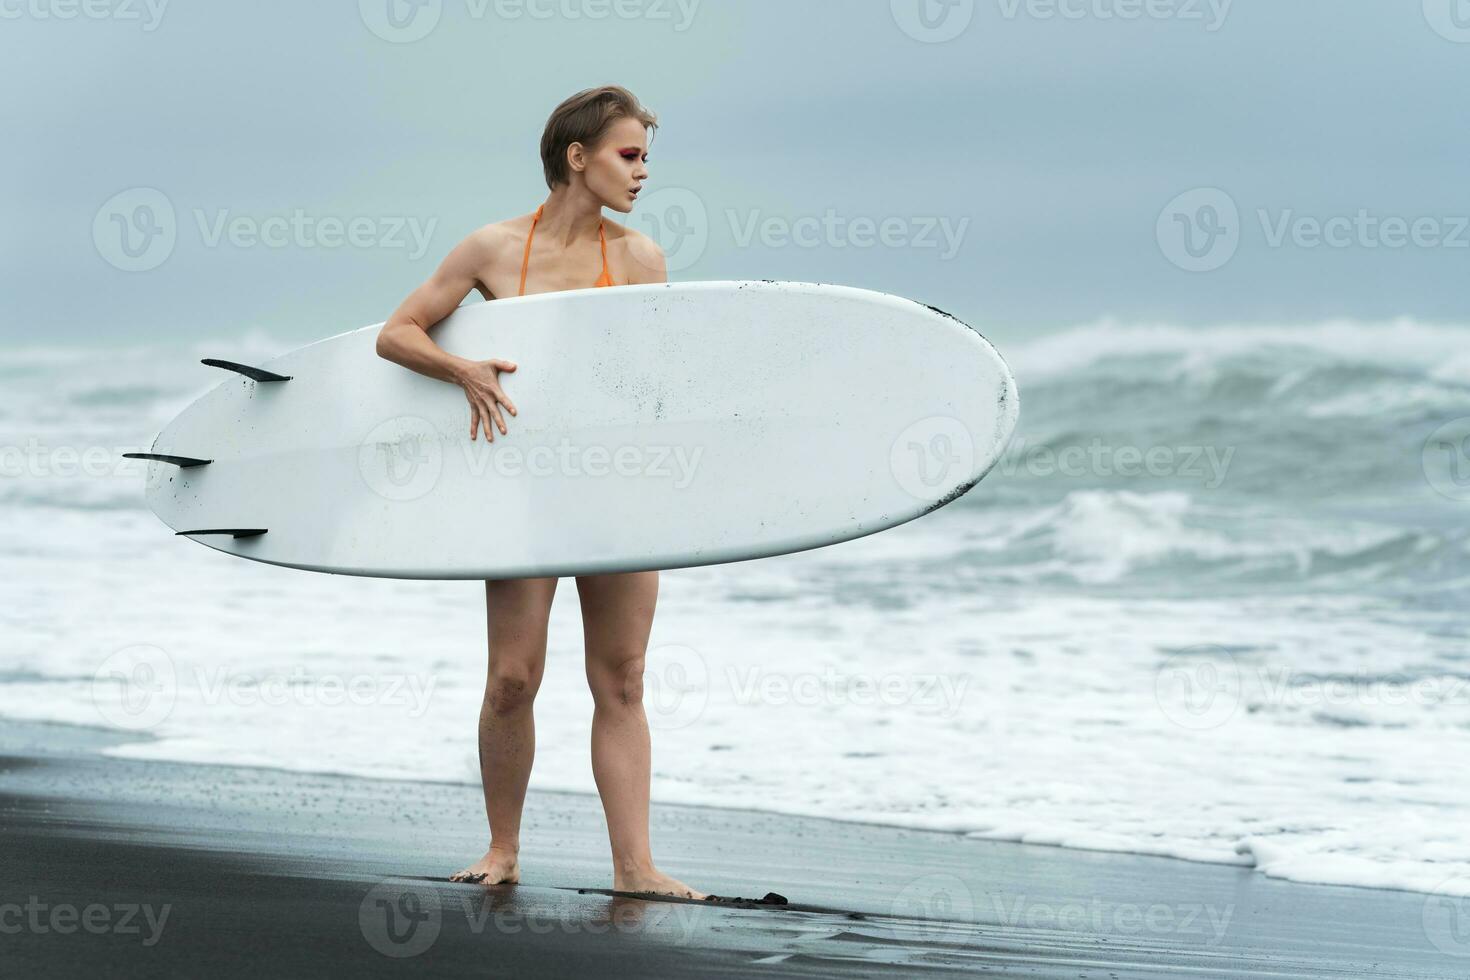 Sexuality woman surfer walking on sandy beach with white surfboard against background ocean waves photo